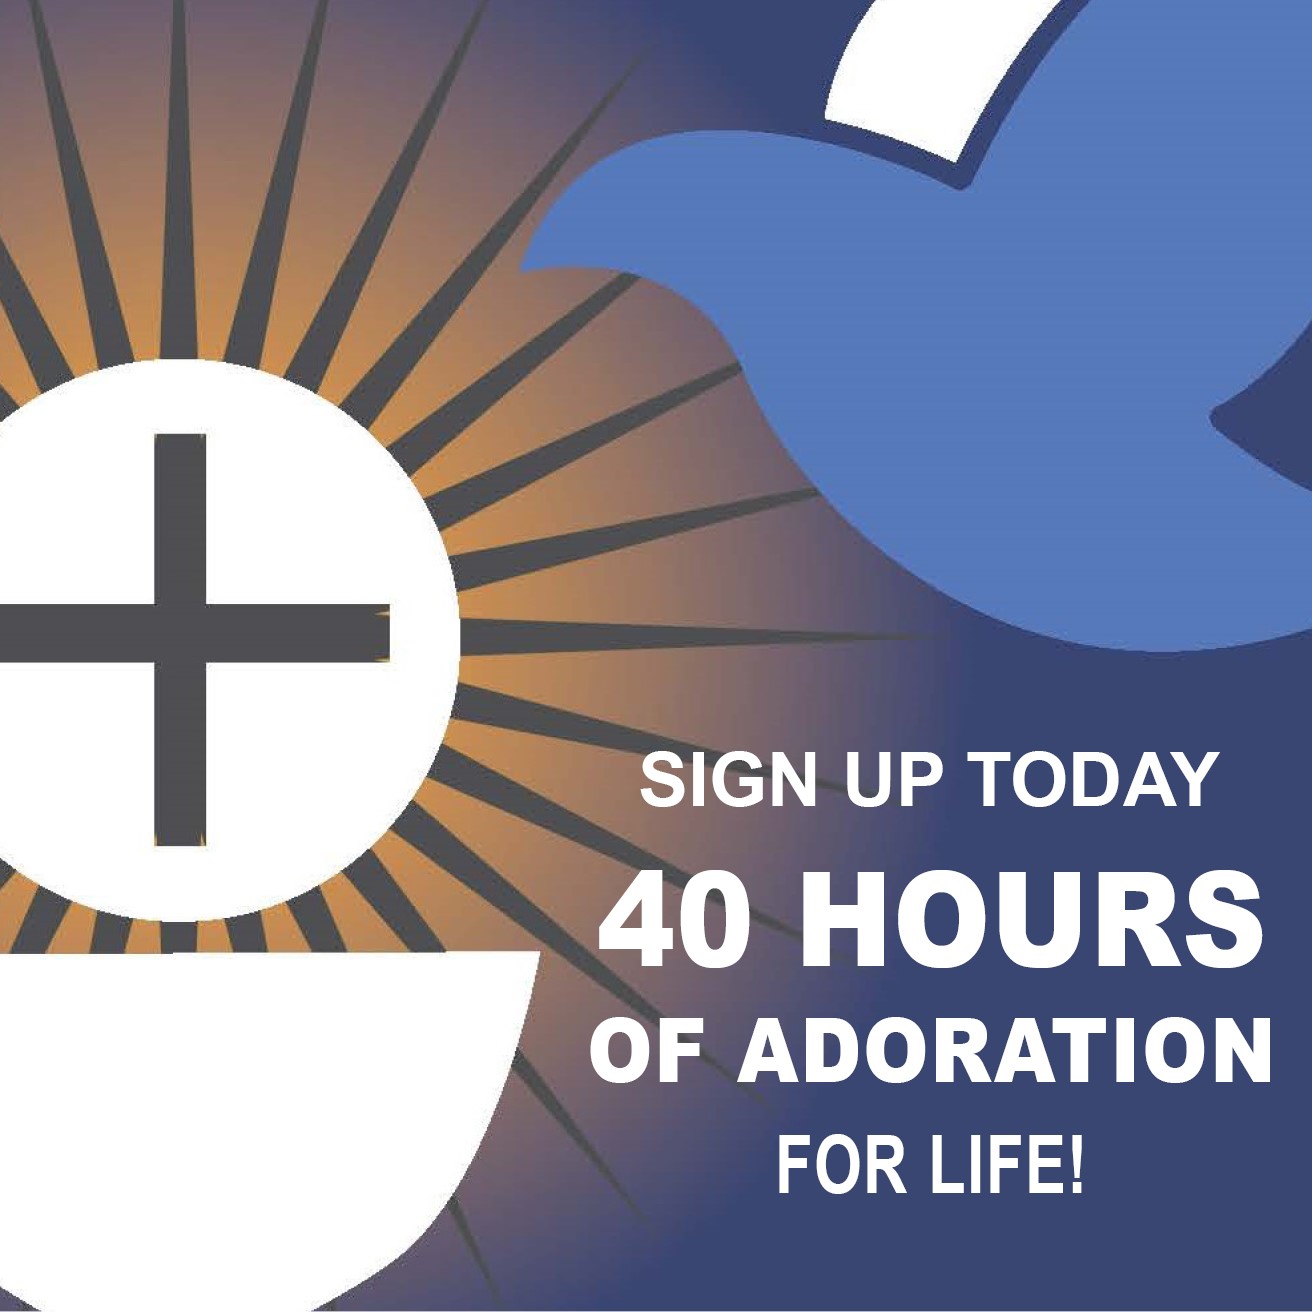 Our Lady of the Wayside Catholic Church Pray a Holy Hour for Life